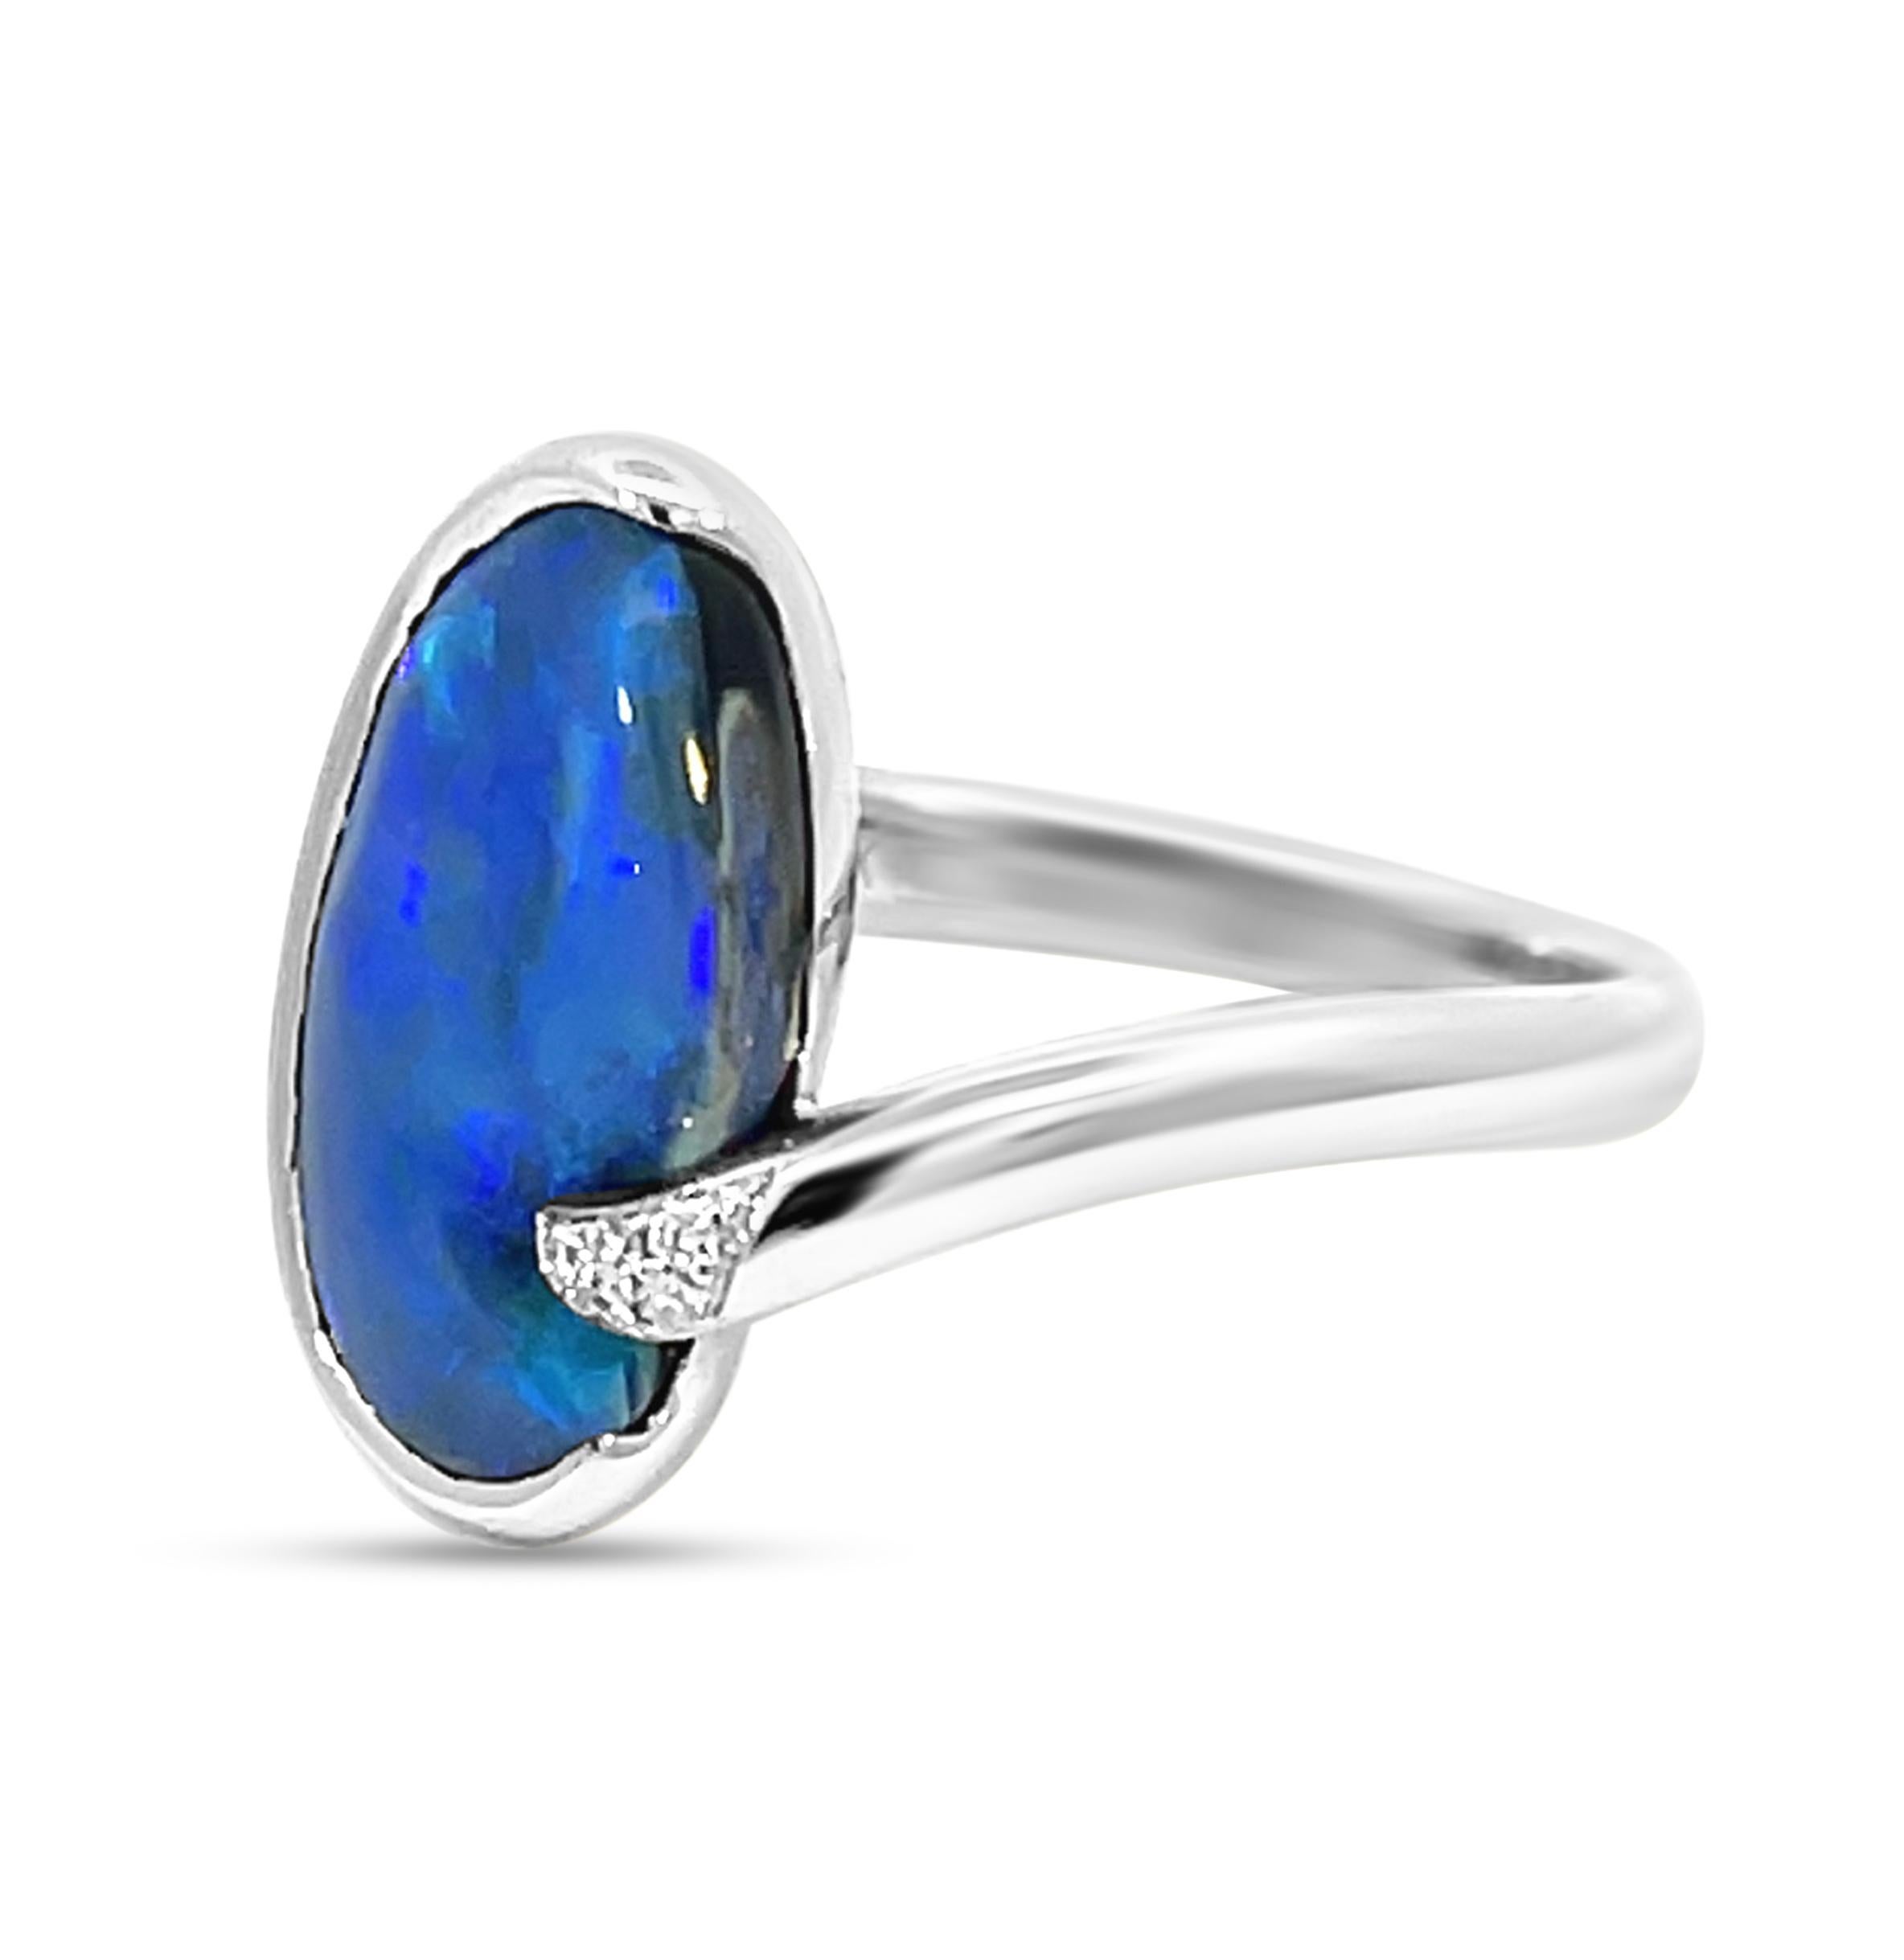 Cabochon Solid Natural Untreated Australian 3.85ct Black Opal Ring in 18k White Gold 